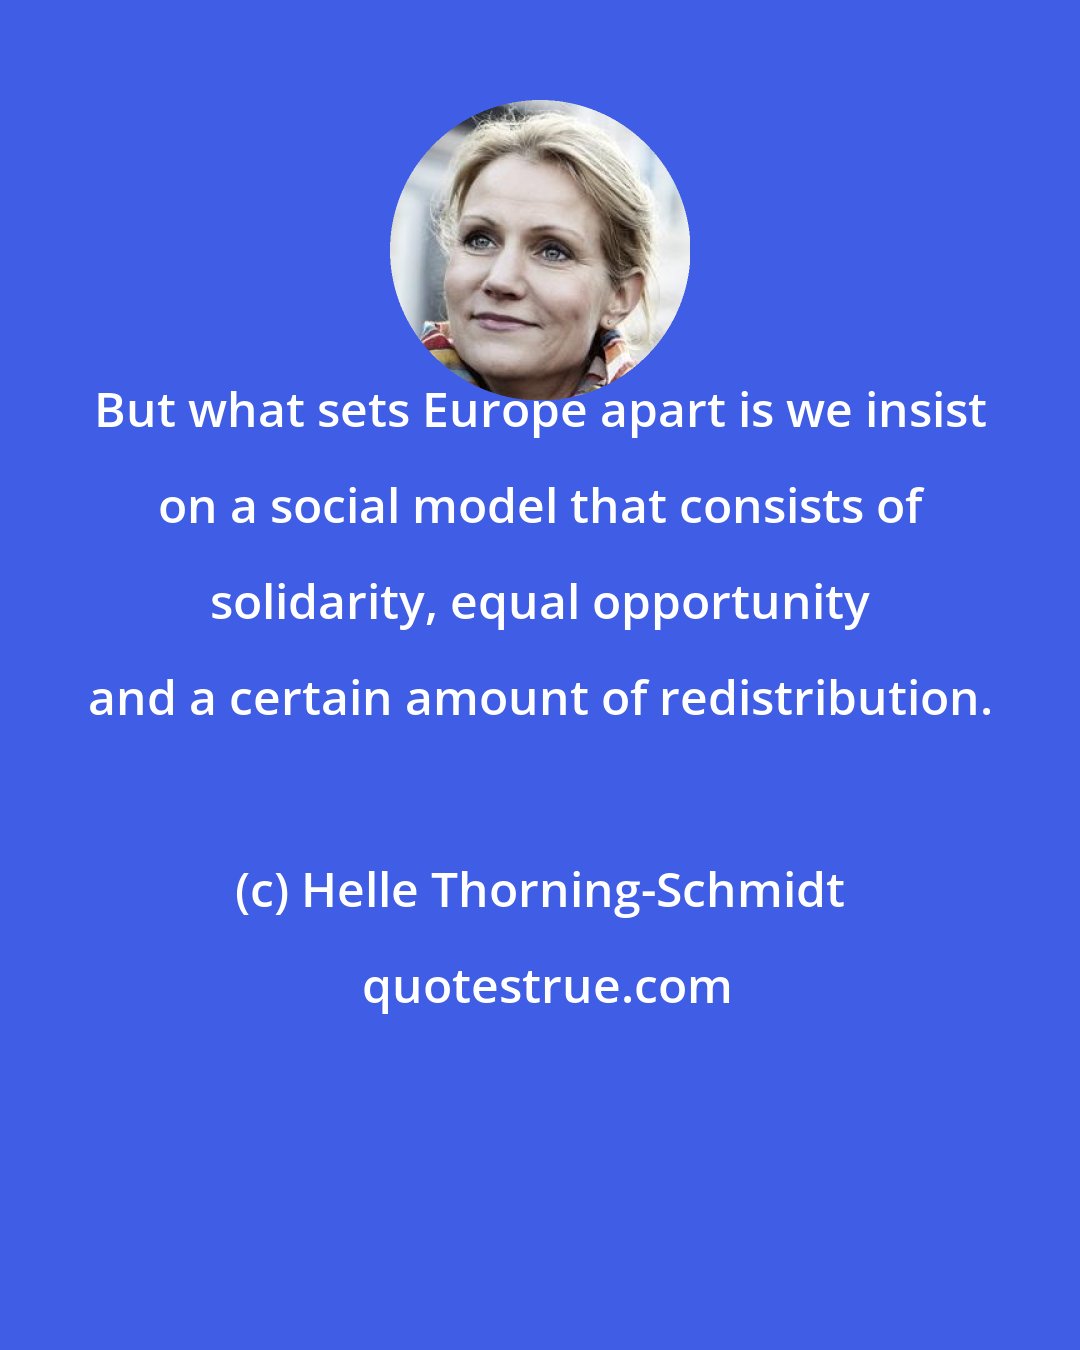 Helle Thorning-Schmidt: But what sets Europe apart is we insist on a social model that consists of solidarity, equal opportunity and a certain amount of redistribution.